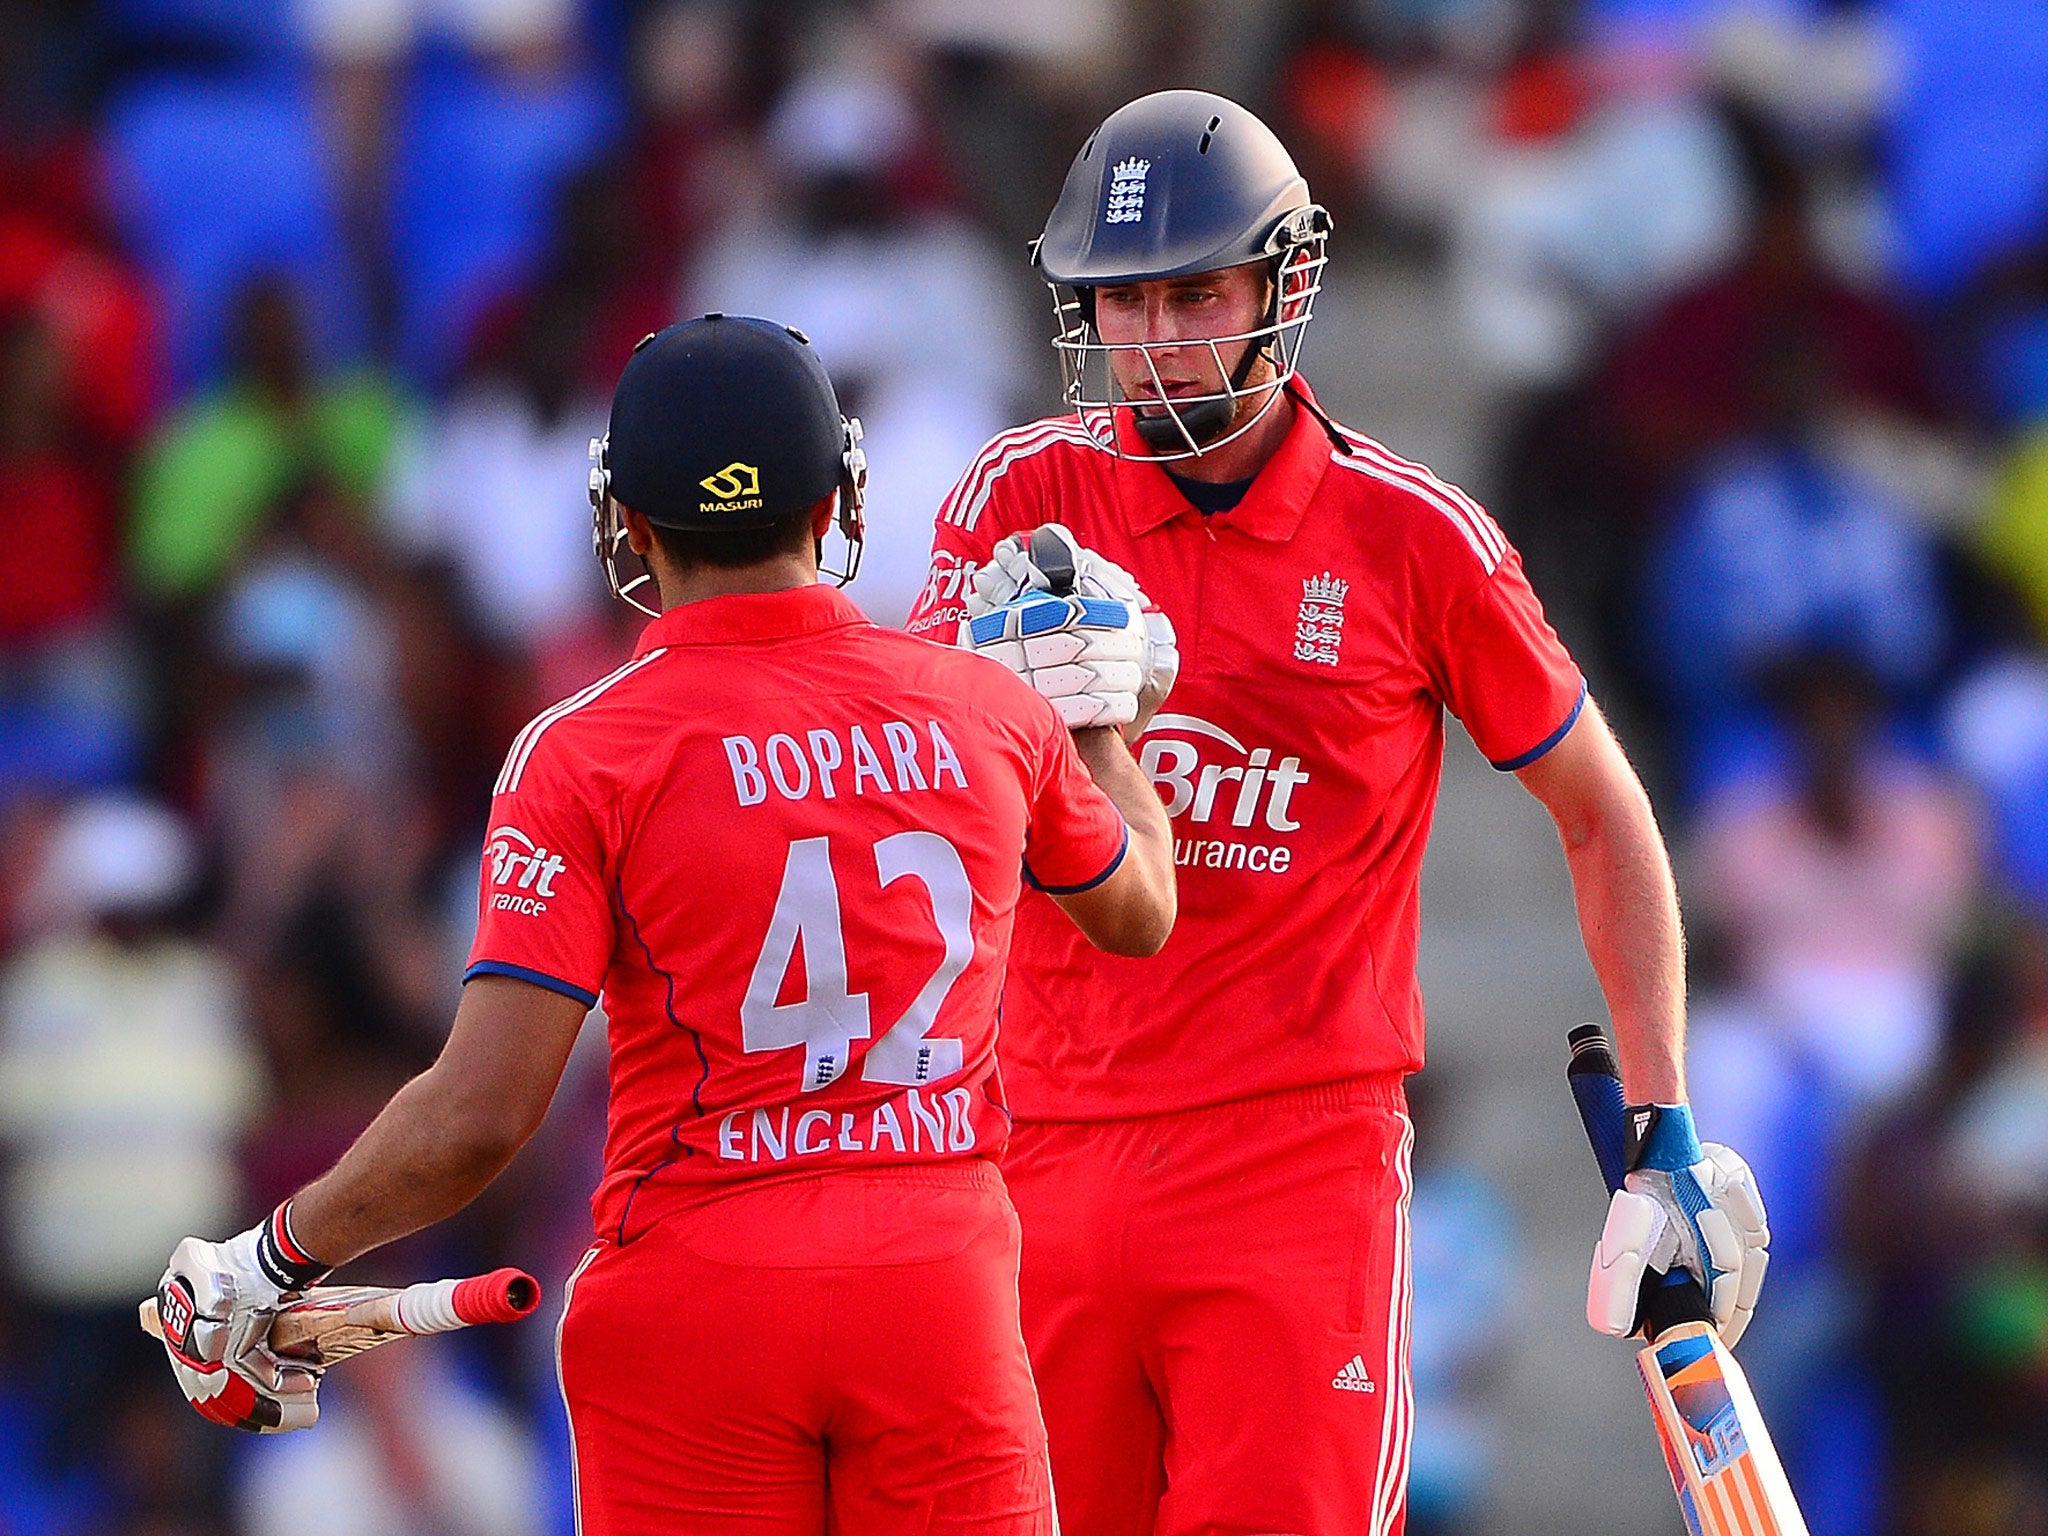 England's captain Stuart Broad (right) and Ravi Bopara celebrate their partnership as England win the second One Day International match against West Indies